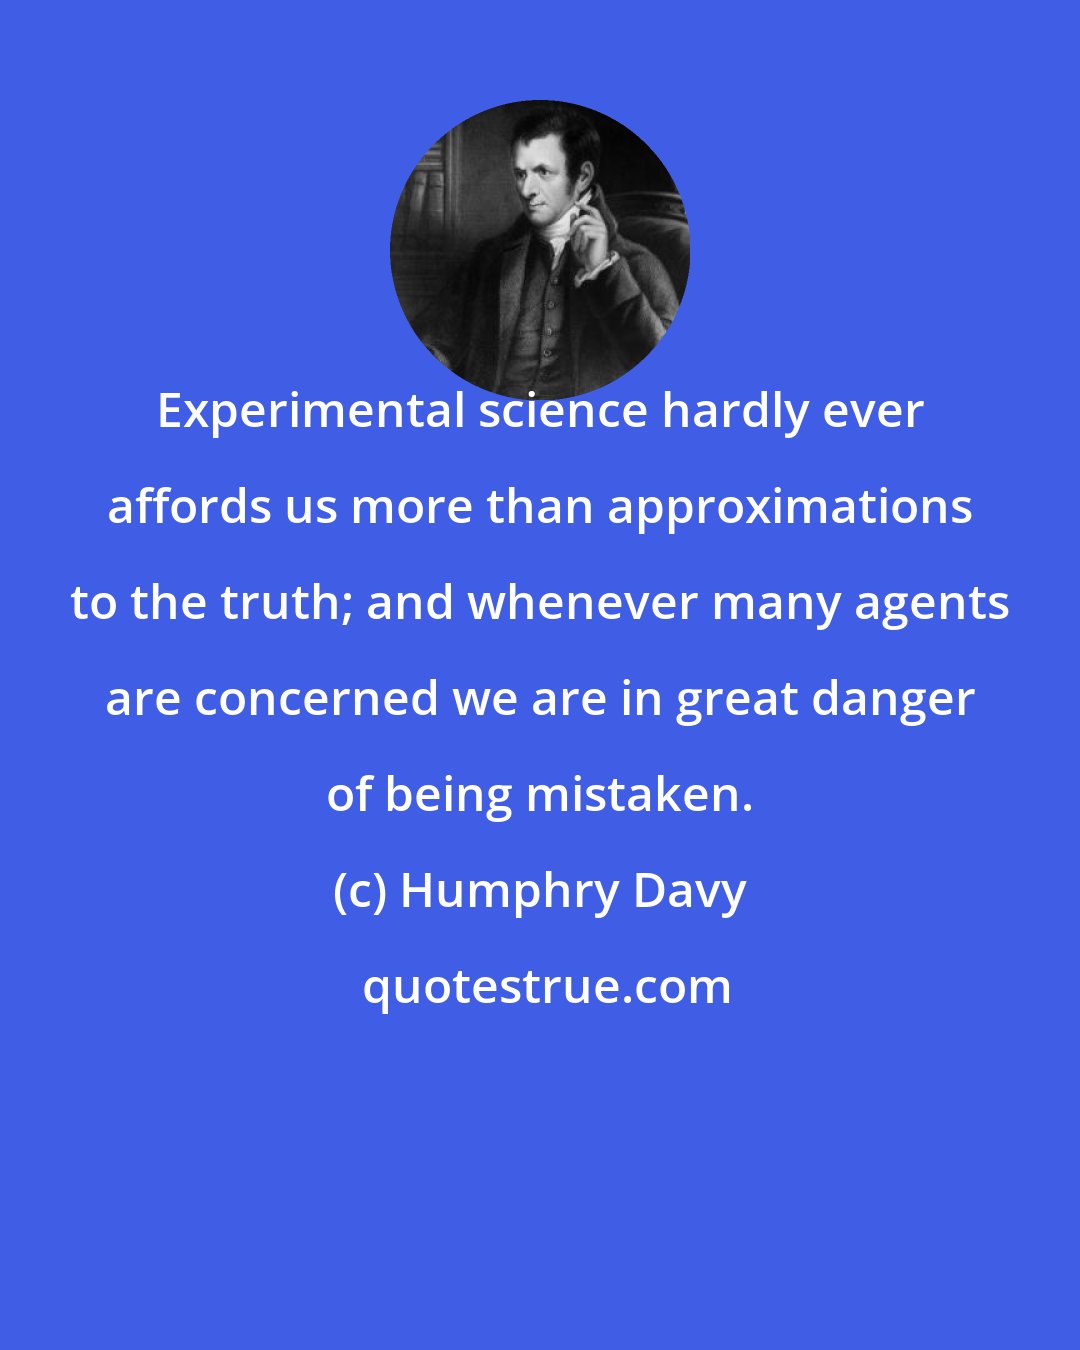 Humphry Davy: Experimental science hardly ever affords us more than approximations to the truth; and whenever many agents are concerned we are in great danger of being mistaken.